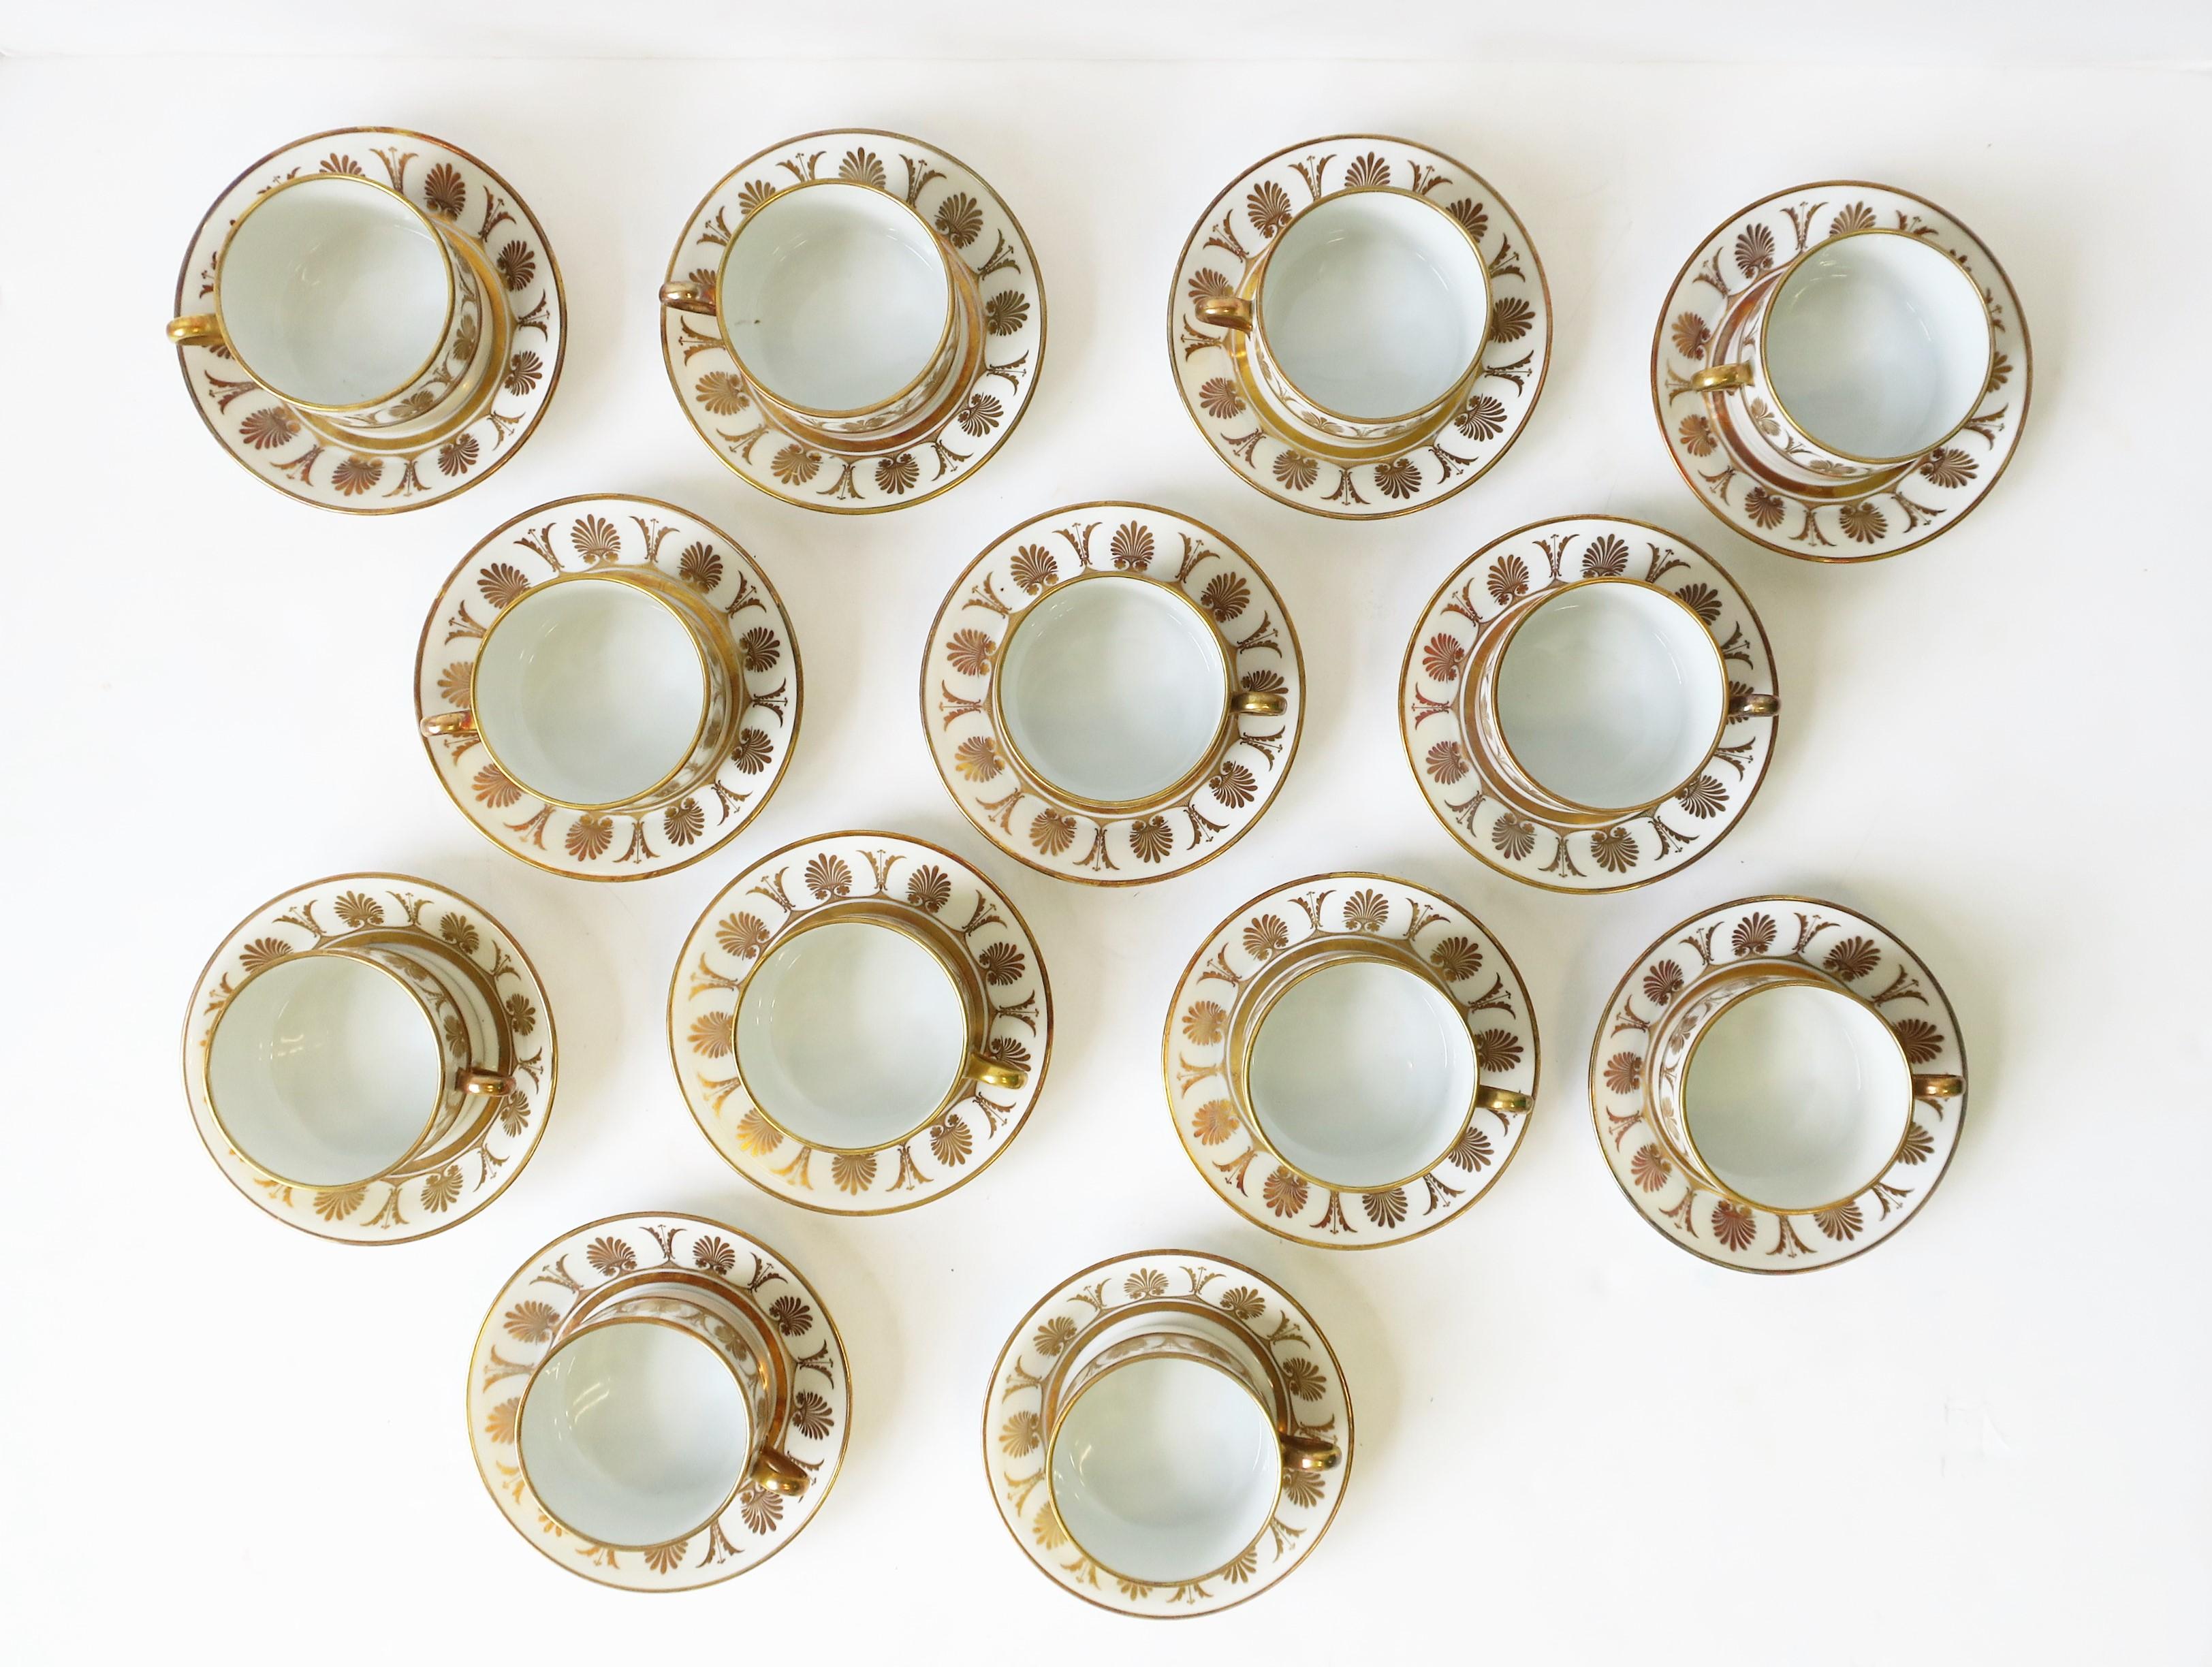 Richard Ginori Vintage Italian White & Gold Coffee or Tea Cup Saucer, Set of 12 In Good Condition For Sale In New York, NY